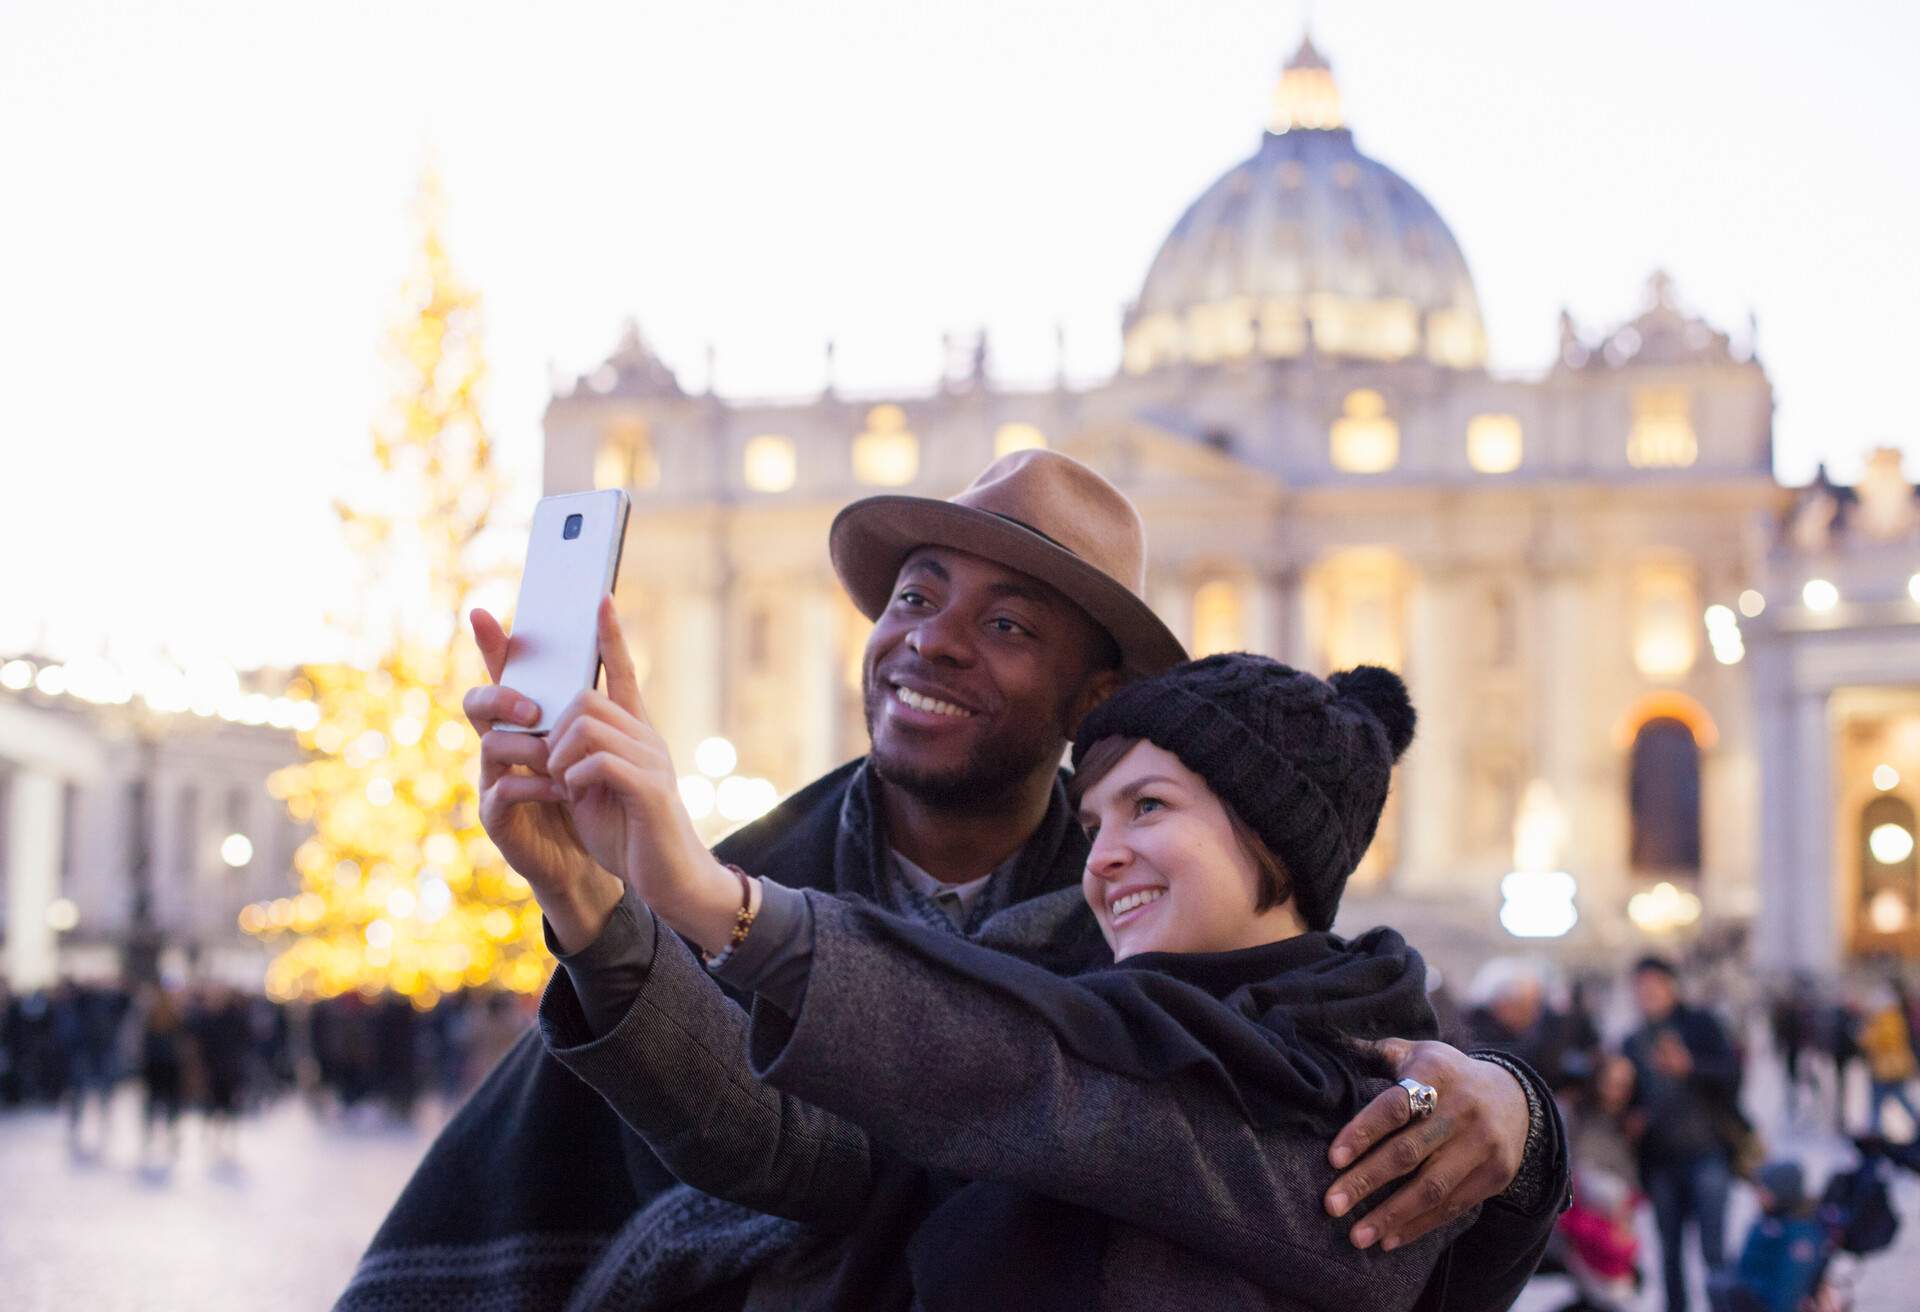 A man and a woman taking a picture together on a plaza with a Renaissance style church and a lit up Christmas tree in the background.